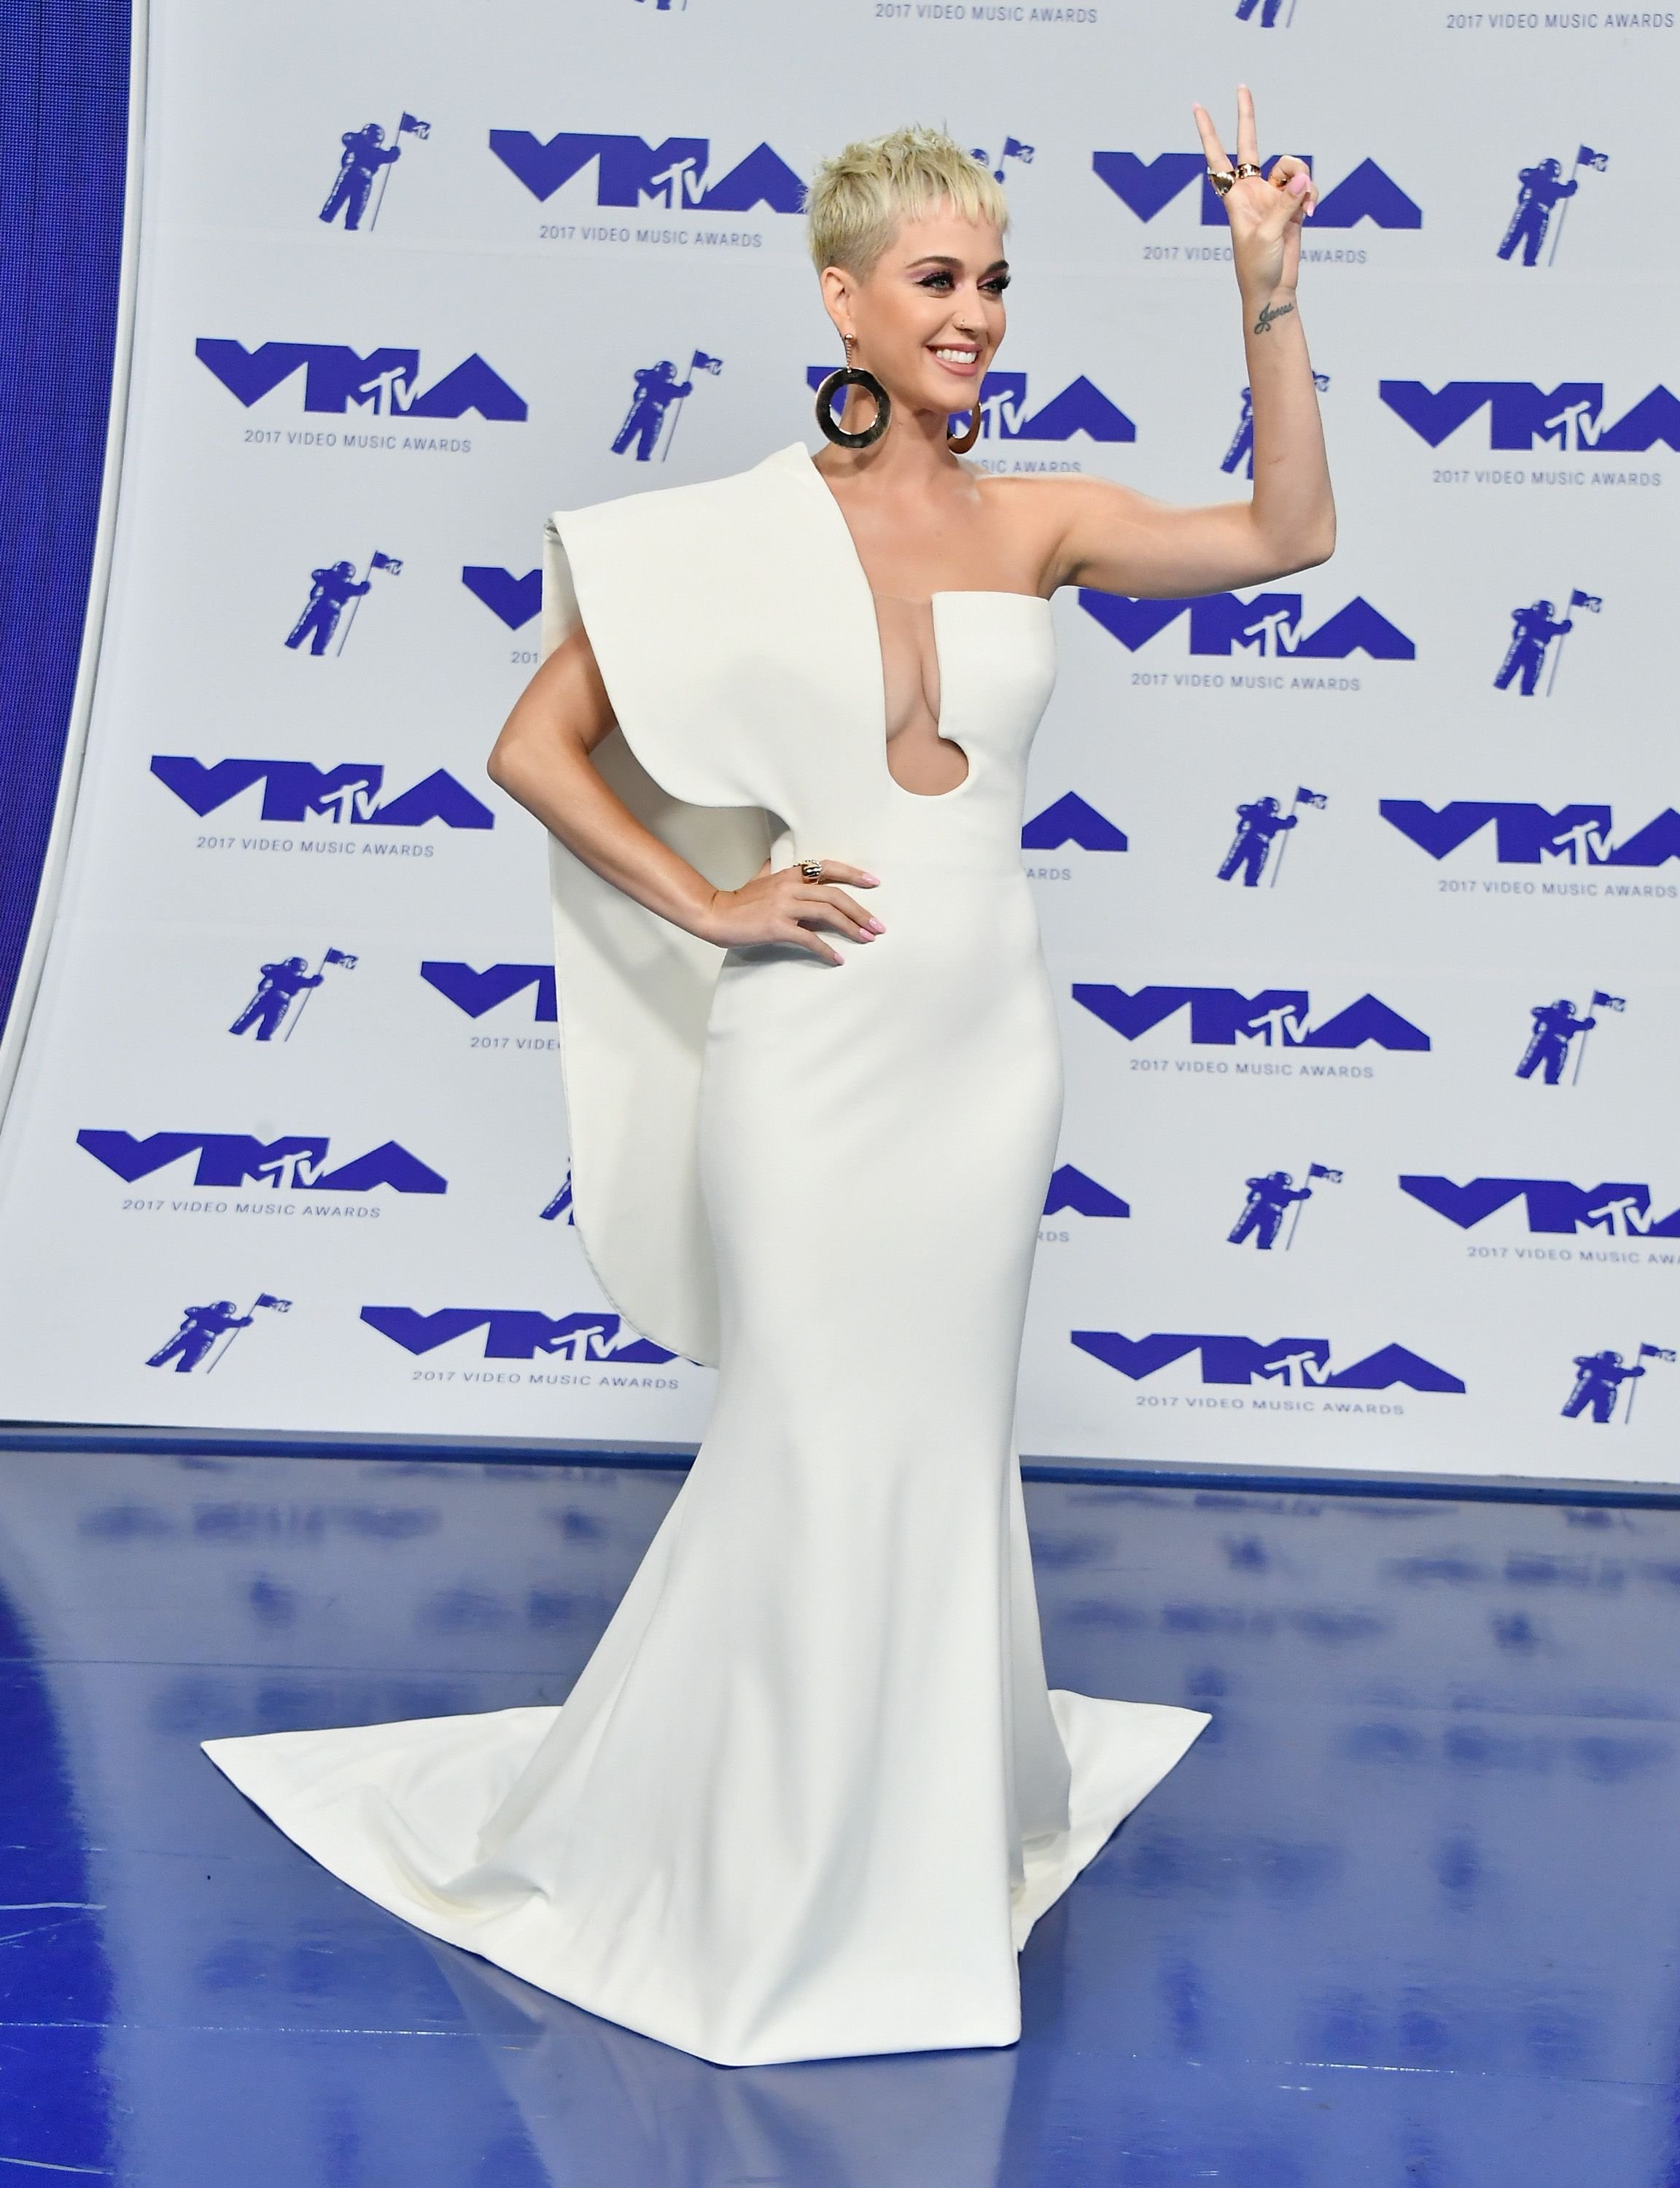 Katy Perry at the 2017 VMA awards| Photo: Getty Images